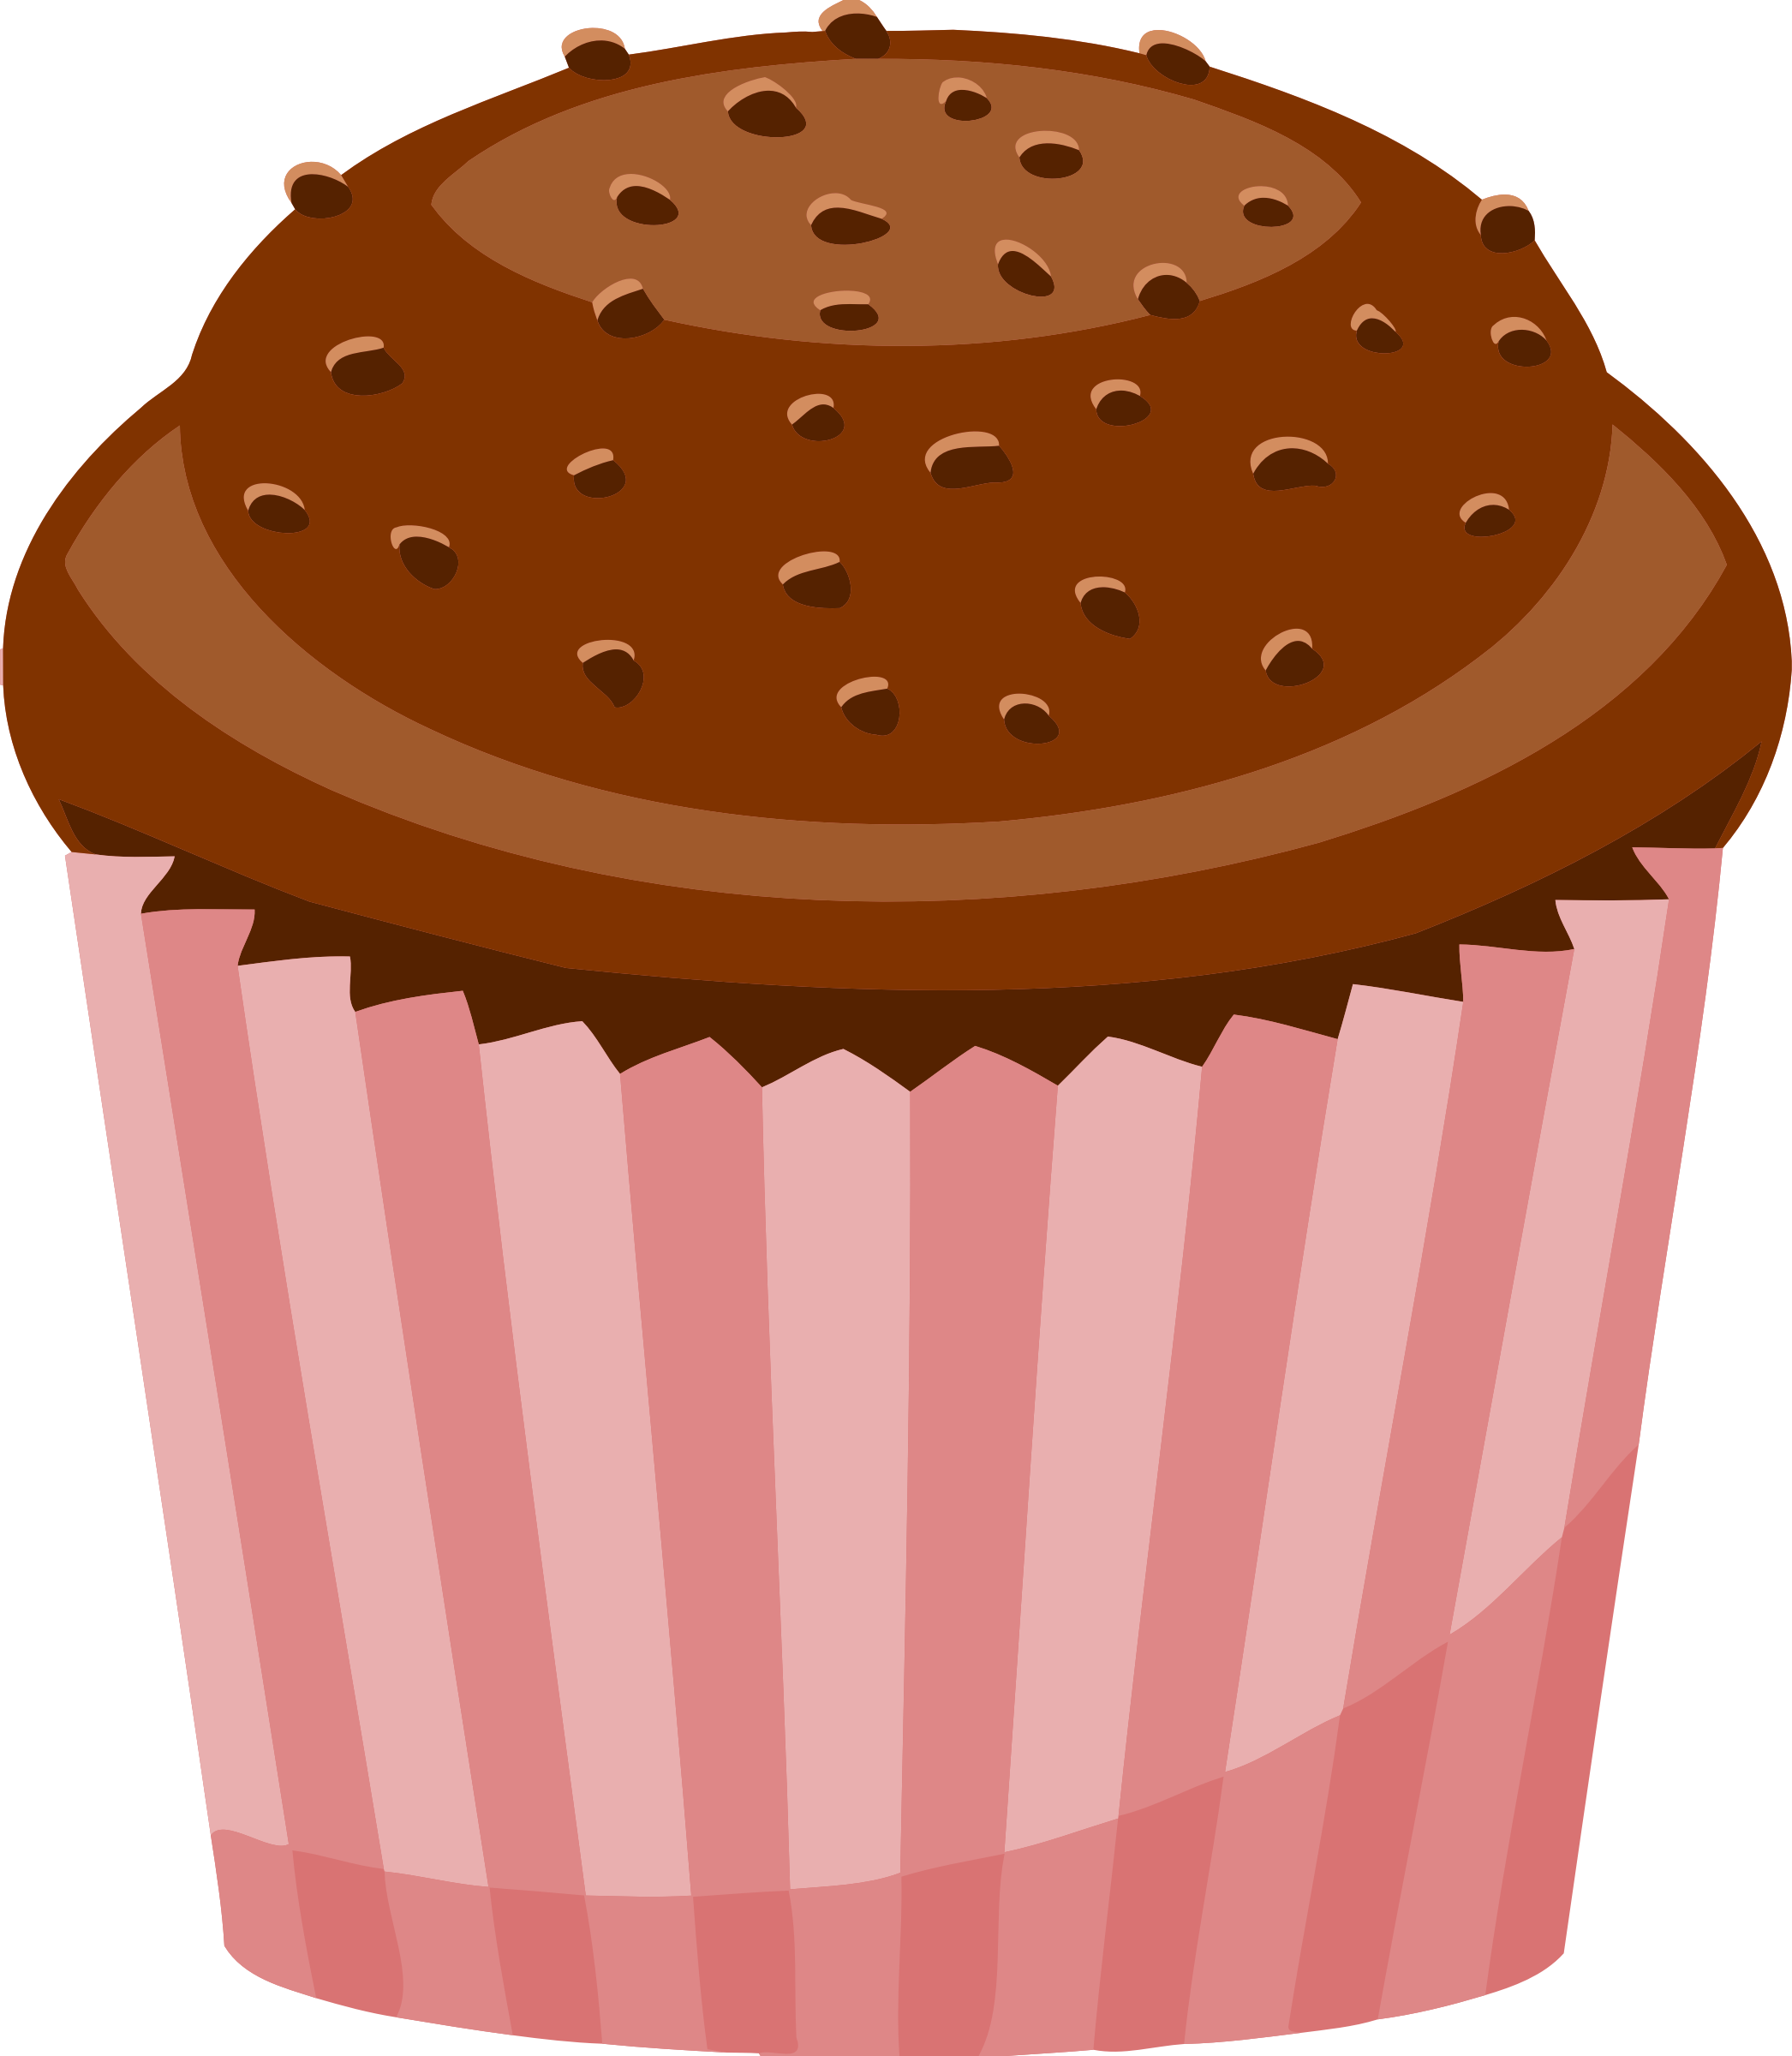 Muffins clipart cupcake shop. Cake icons png free